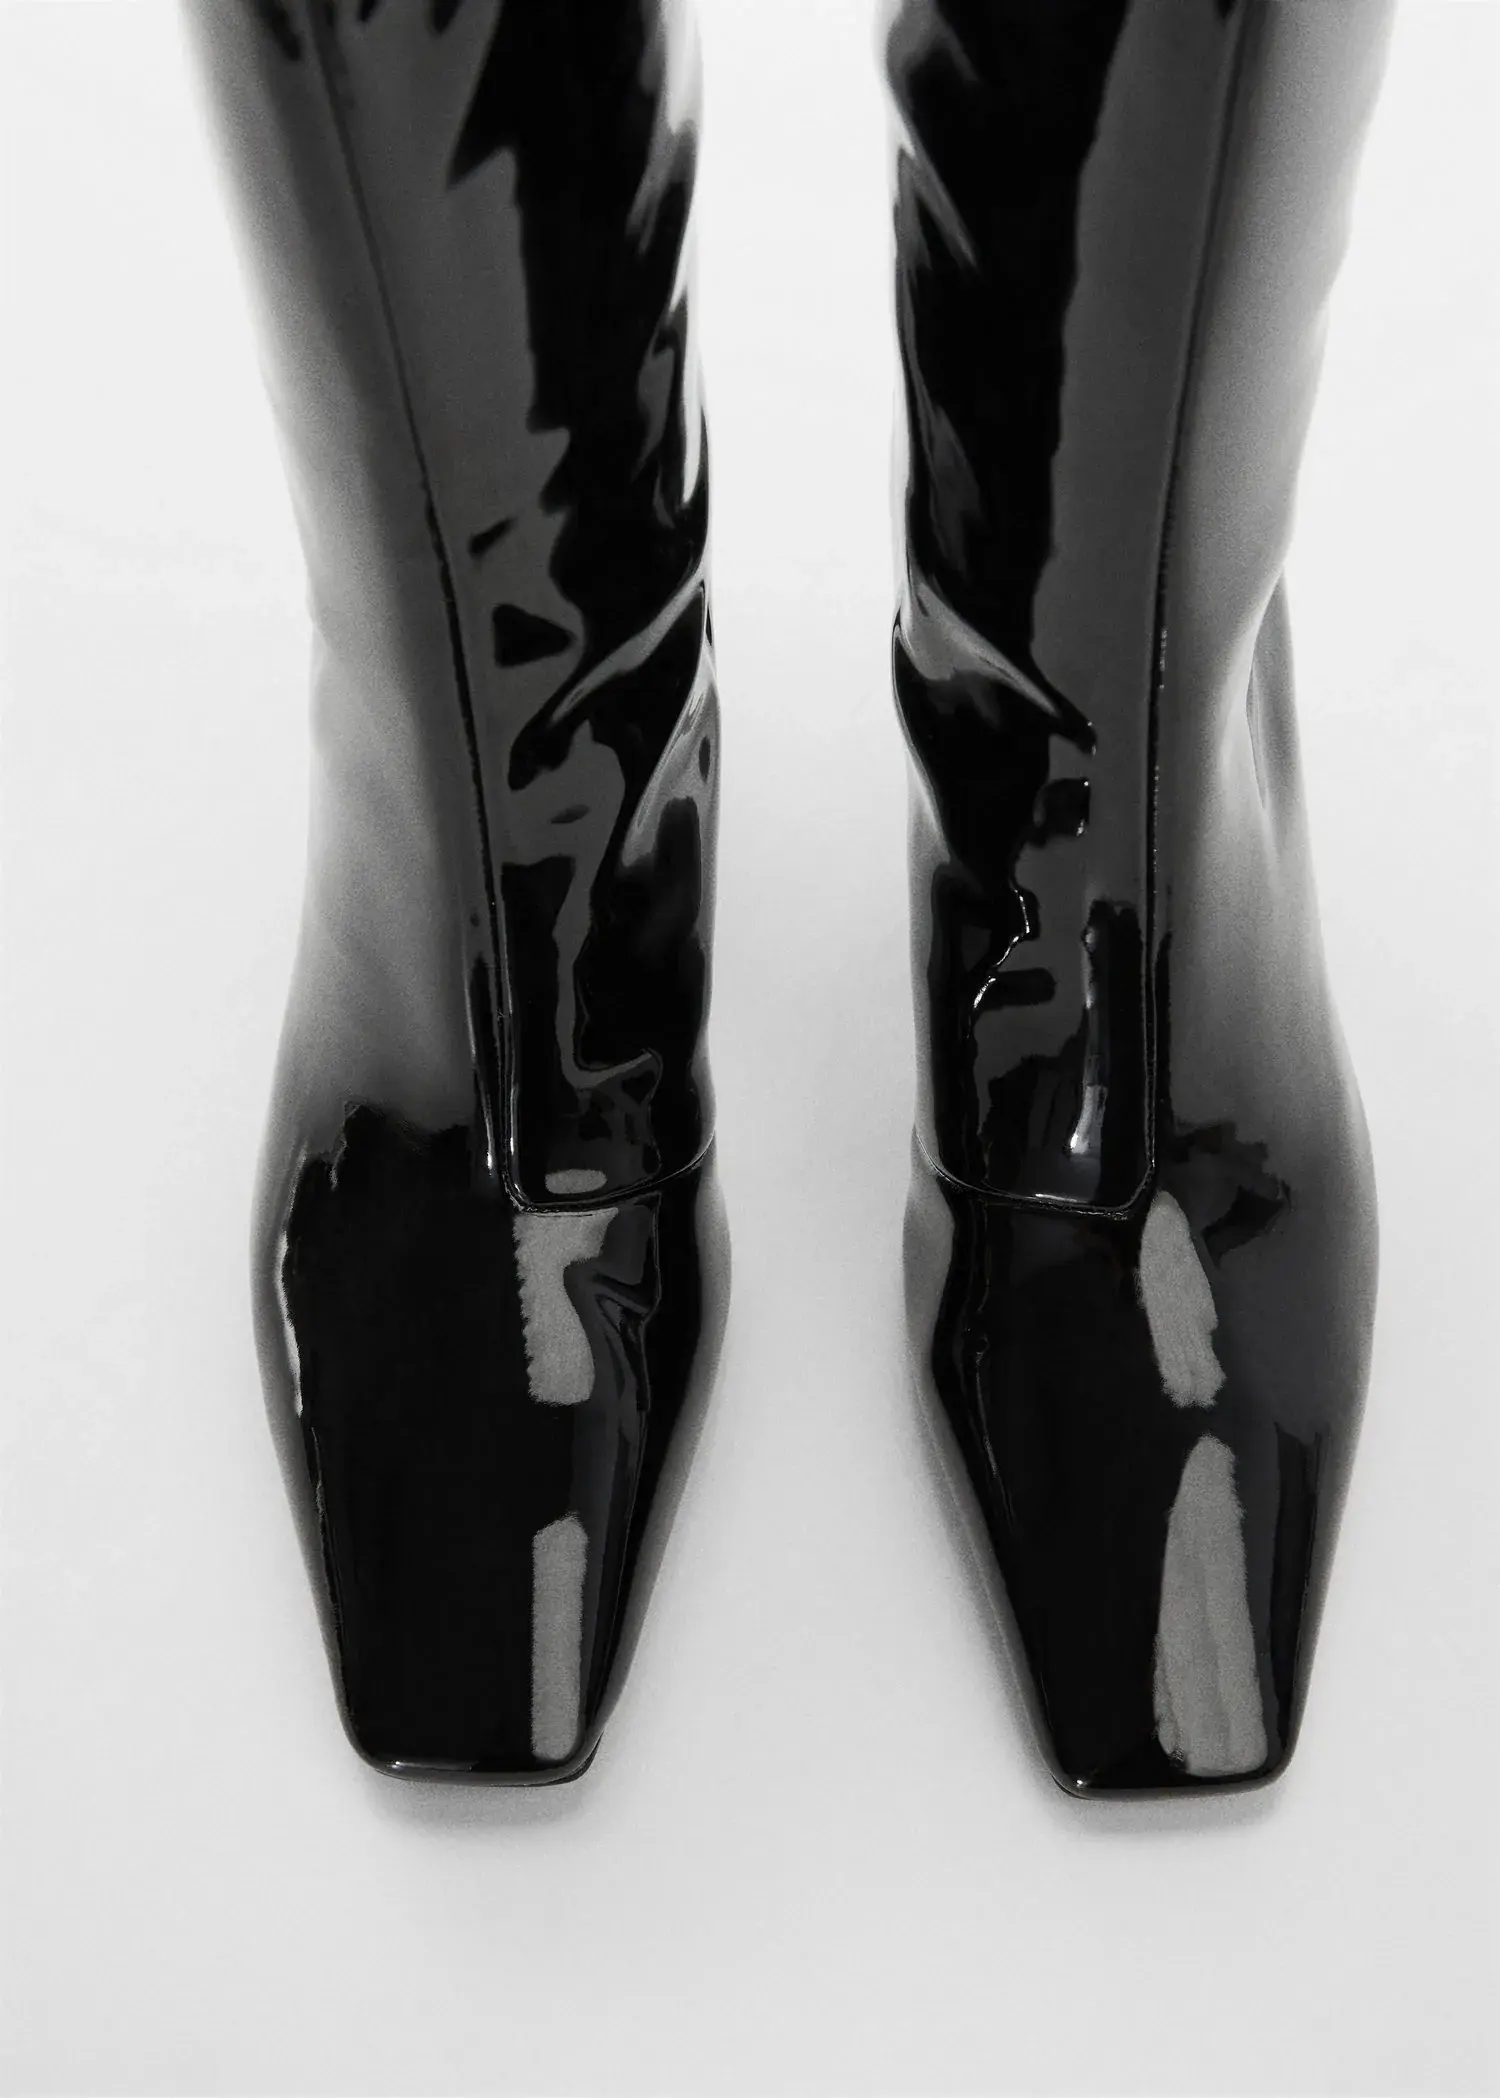 Mango Patent leather-effect heeled boots. 3